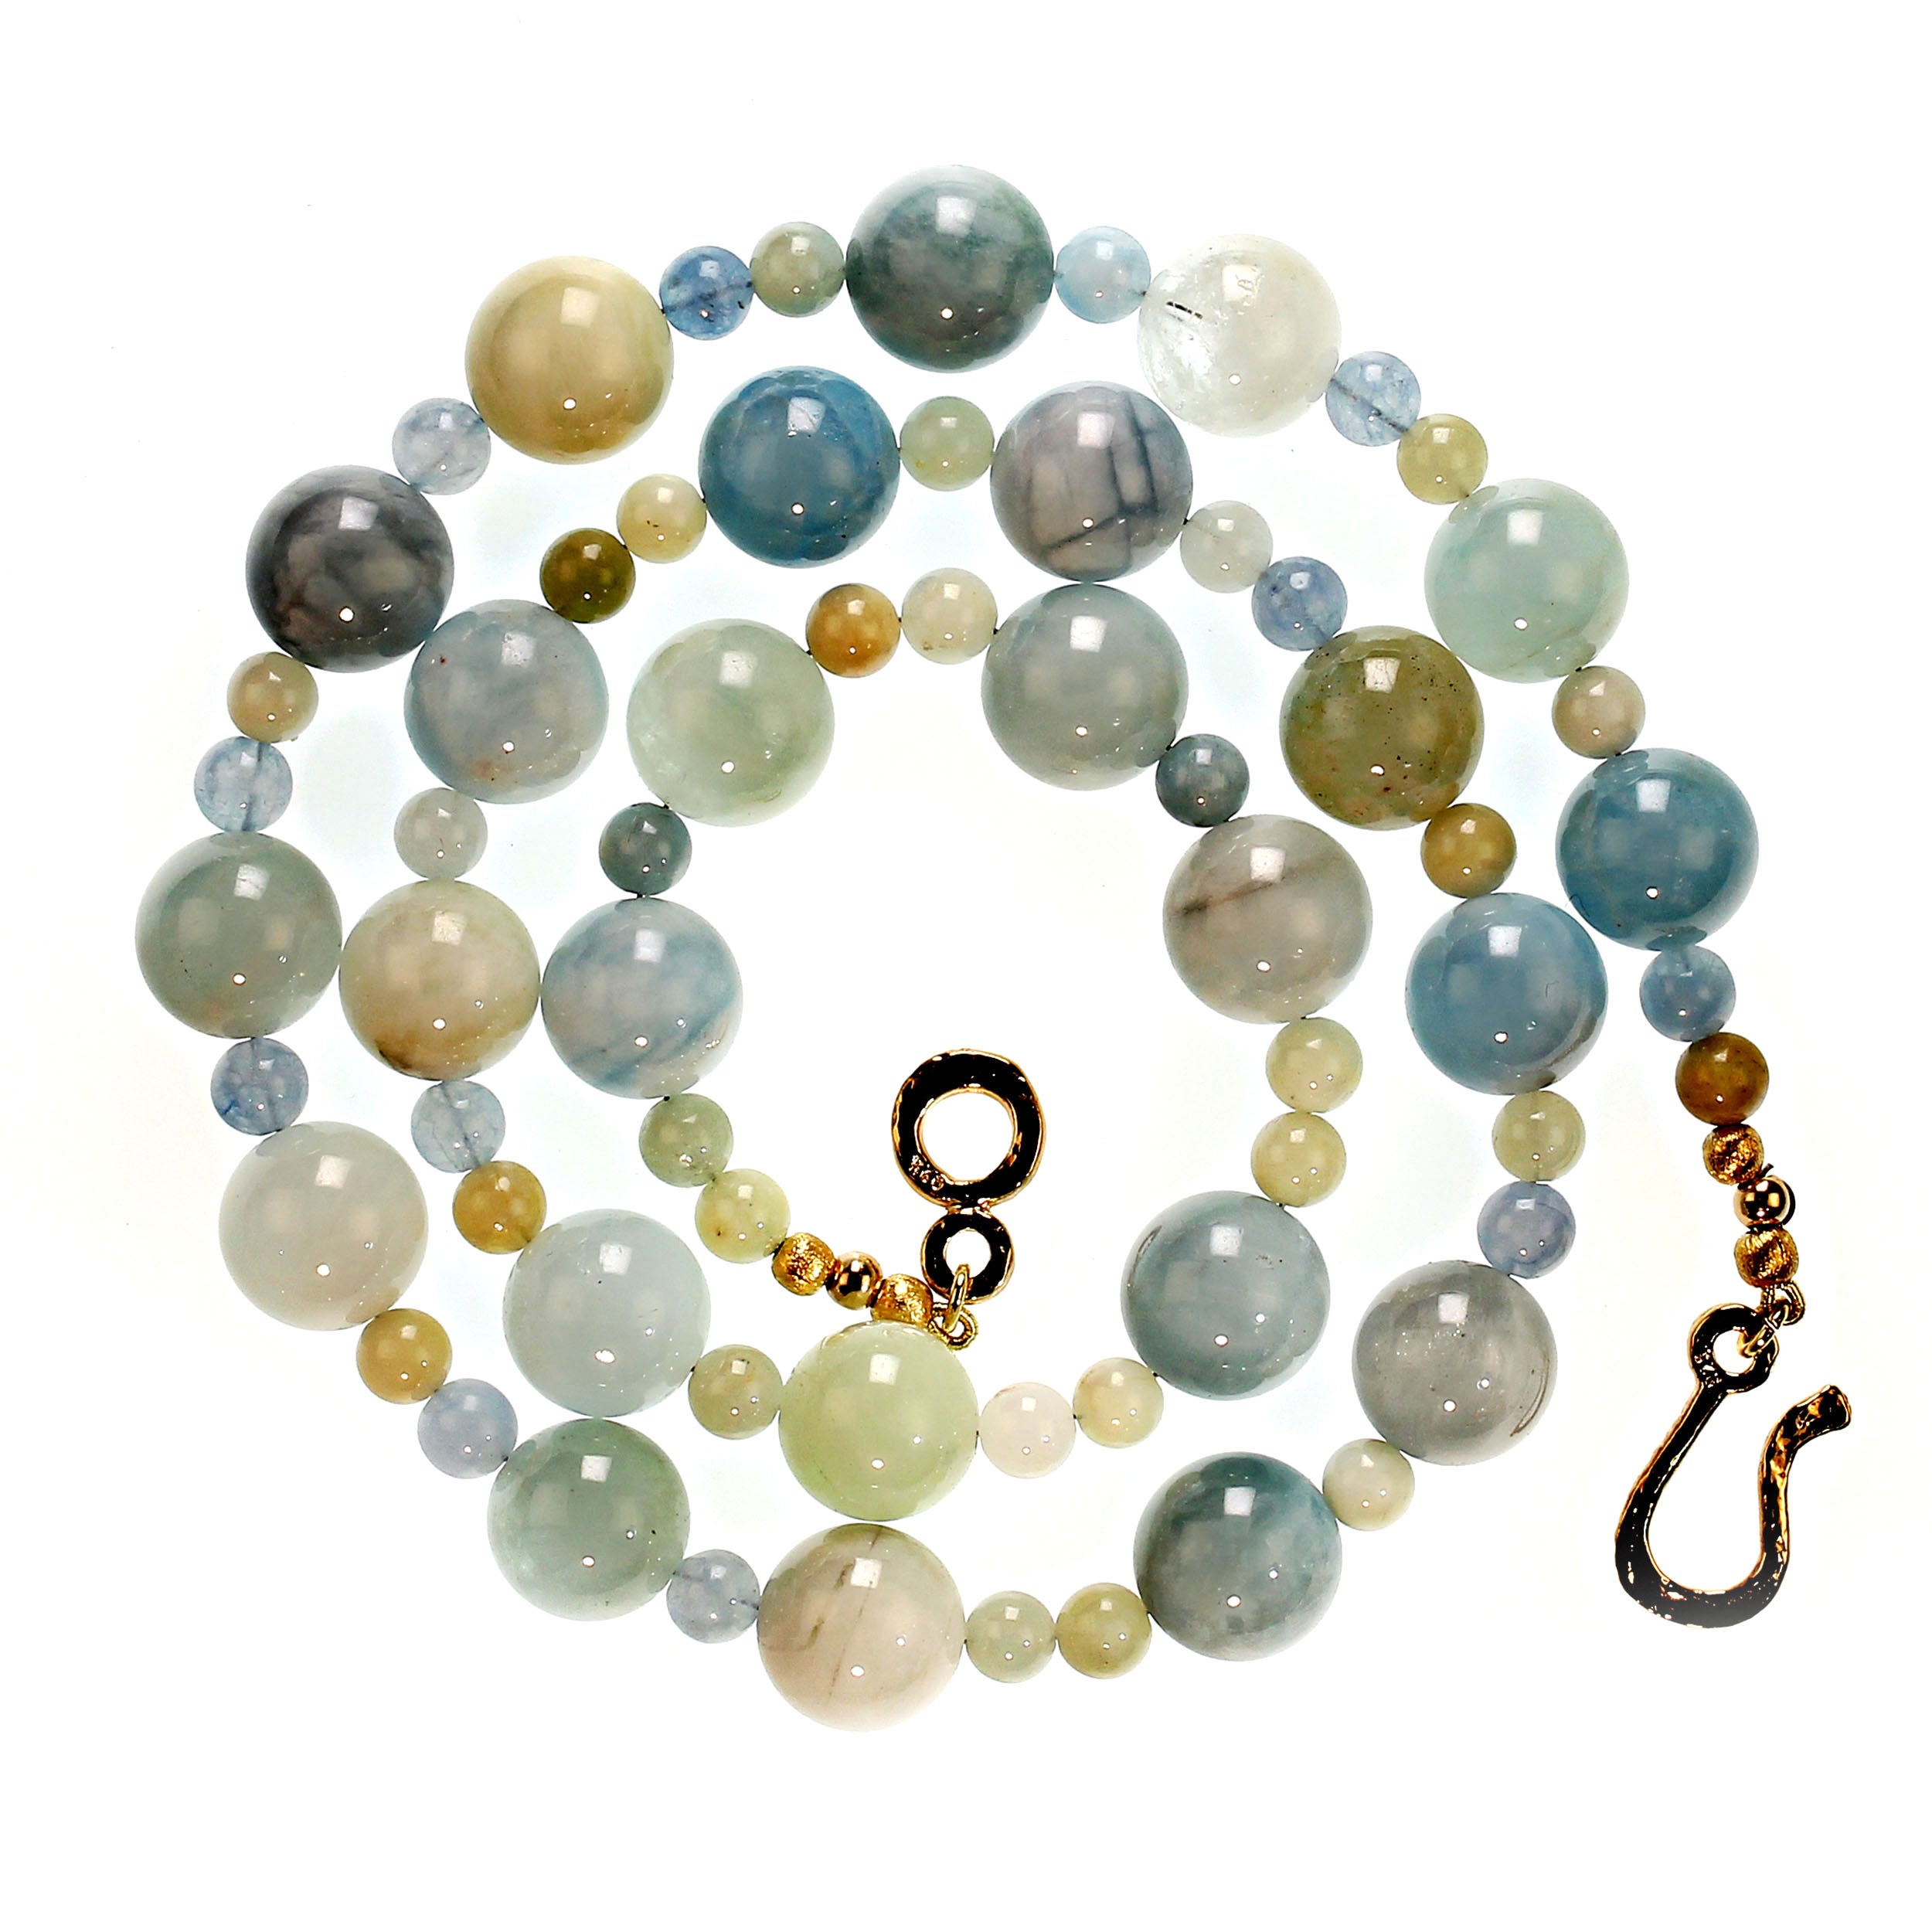 Striking necklace of two sizes of Aquamarine-Beryl,14 and 8 MM, mix blue, green, and cream colors of Aquamarine and Beryl. This 26-inch necklace is secured with a hammered 14K vermeil hook and eye clasp.  MN2338